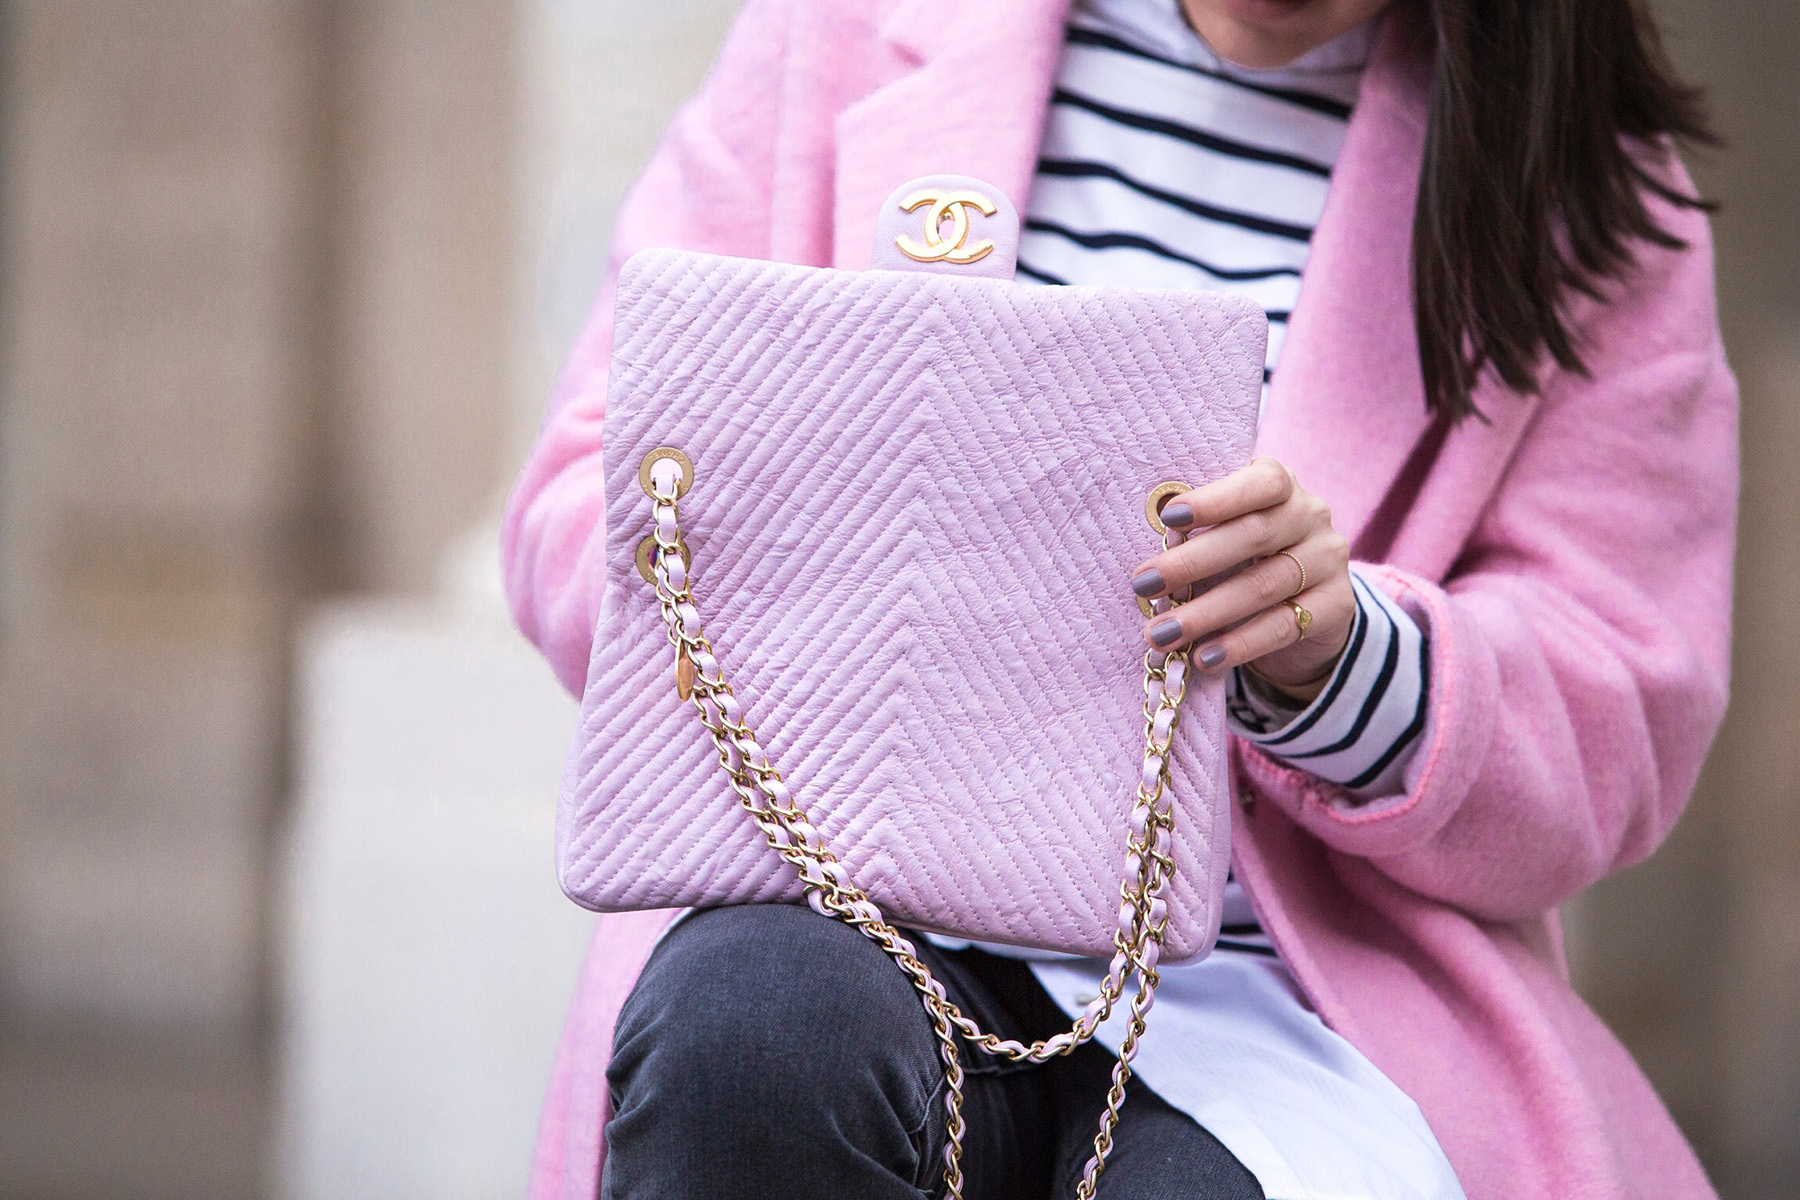 Chanel Pink Bag by Stella Asteria Fashion & Lifestyle Blogger